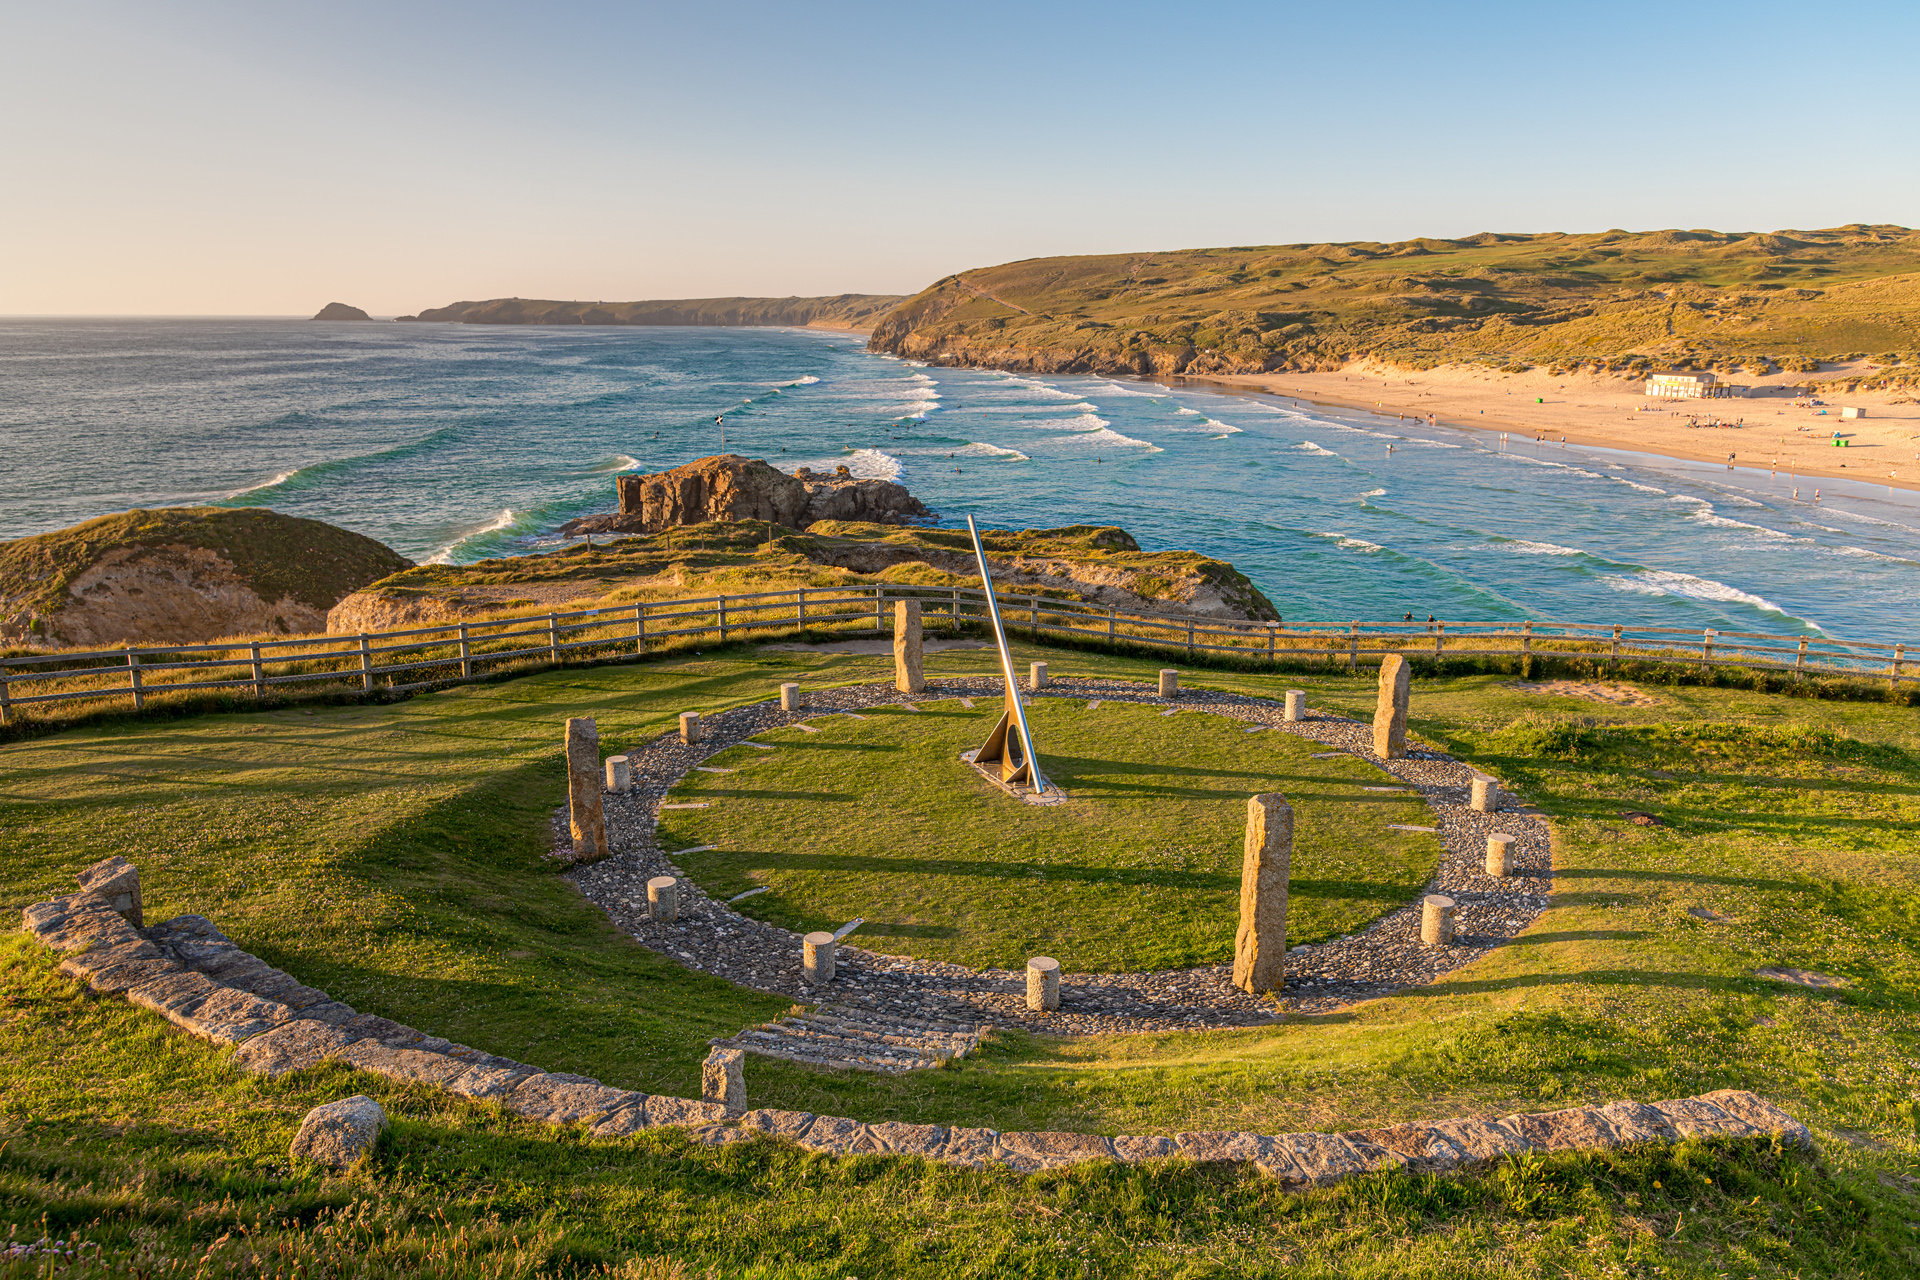 A view of Perranporth, Cornwall with the sun dial in the foreground and the beach behind